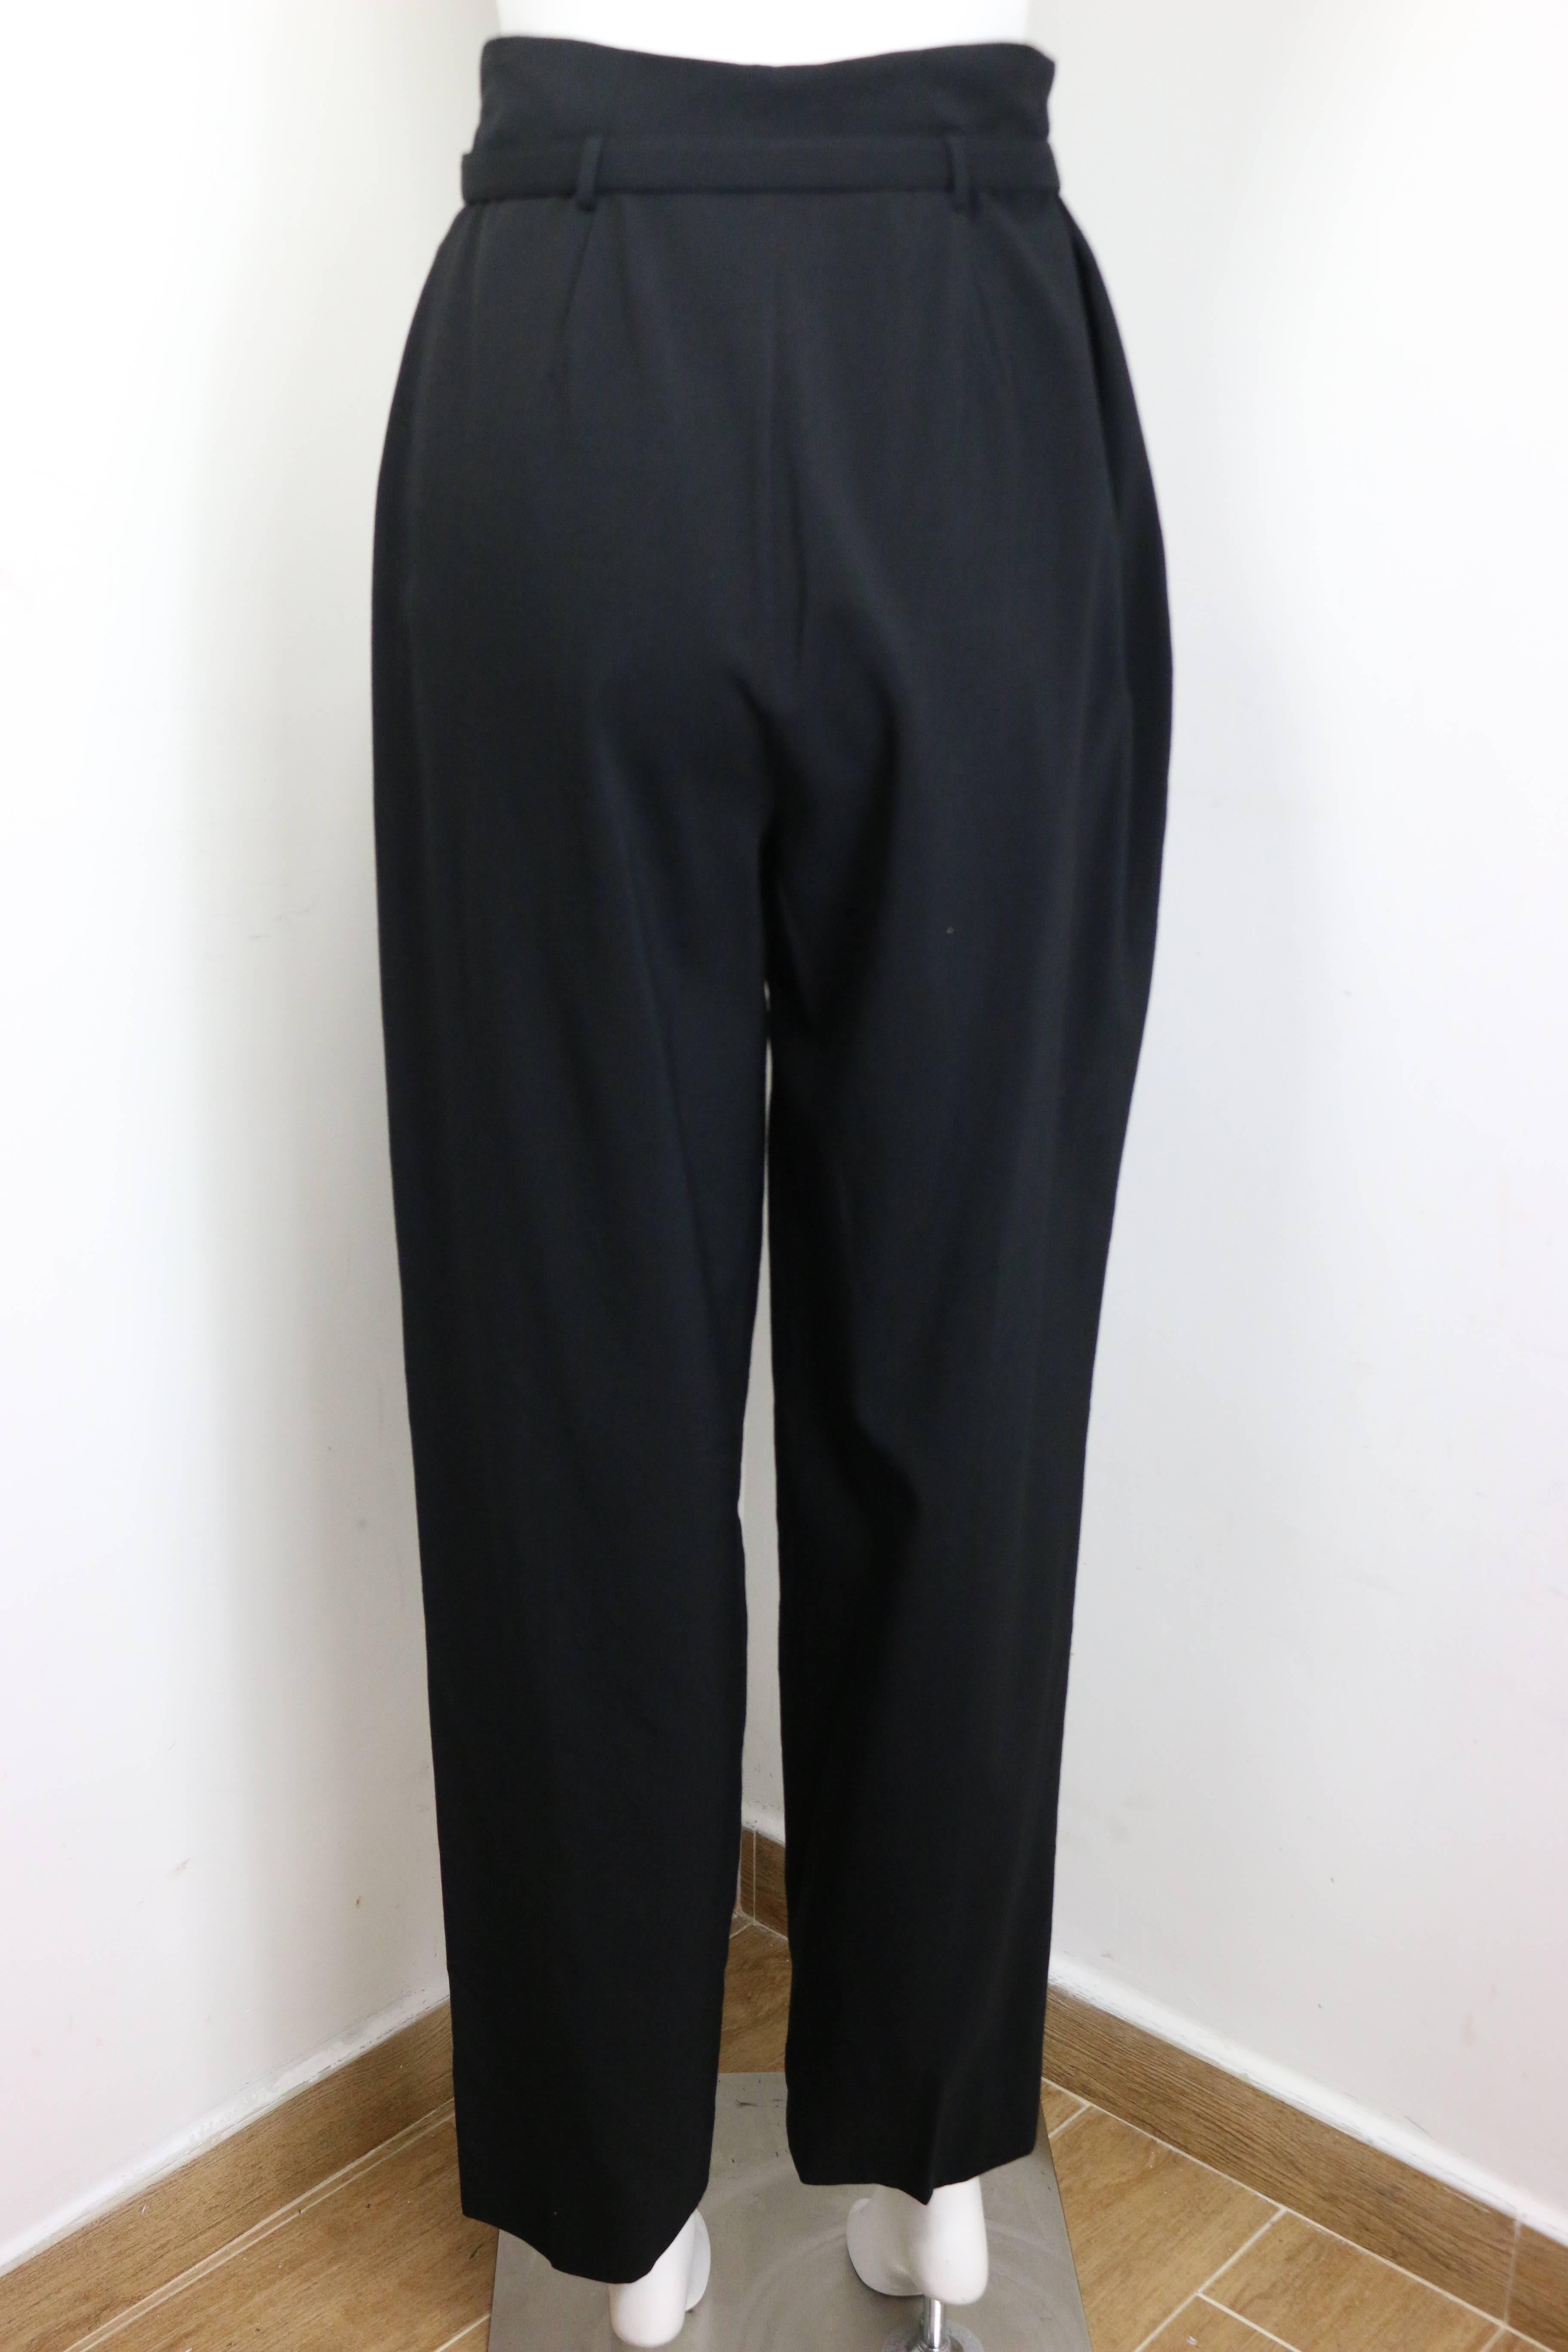 - Vintage black wool carrot pants from year 1998 Pre collection. Featuring a zipper and snap button with a wool 